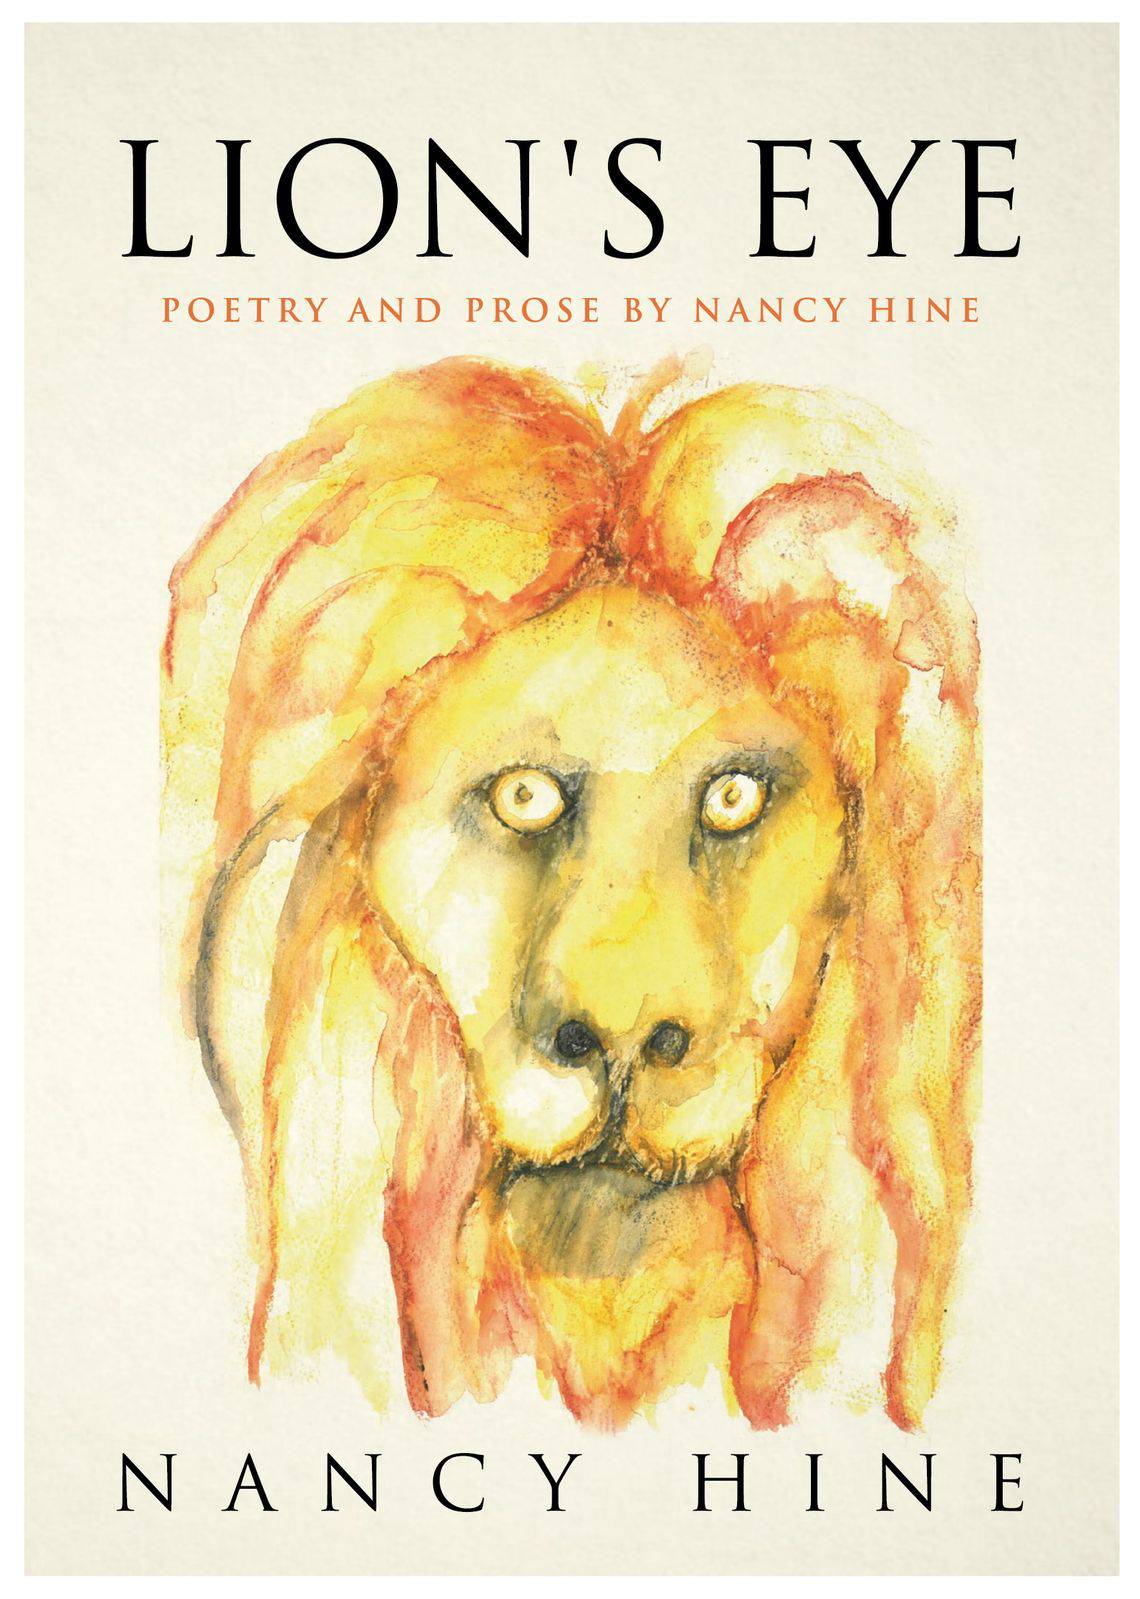 Lion's Eye: poetry and prose by Nancy Hine